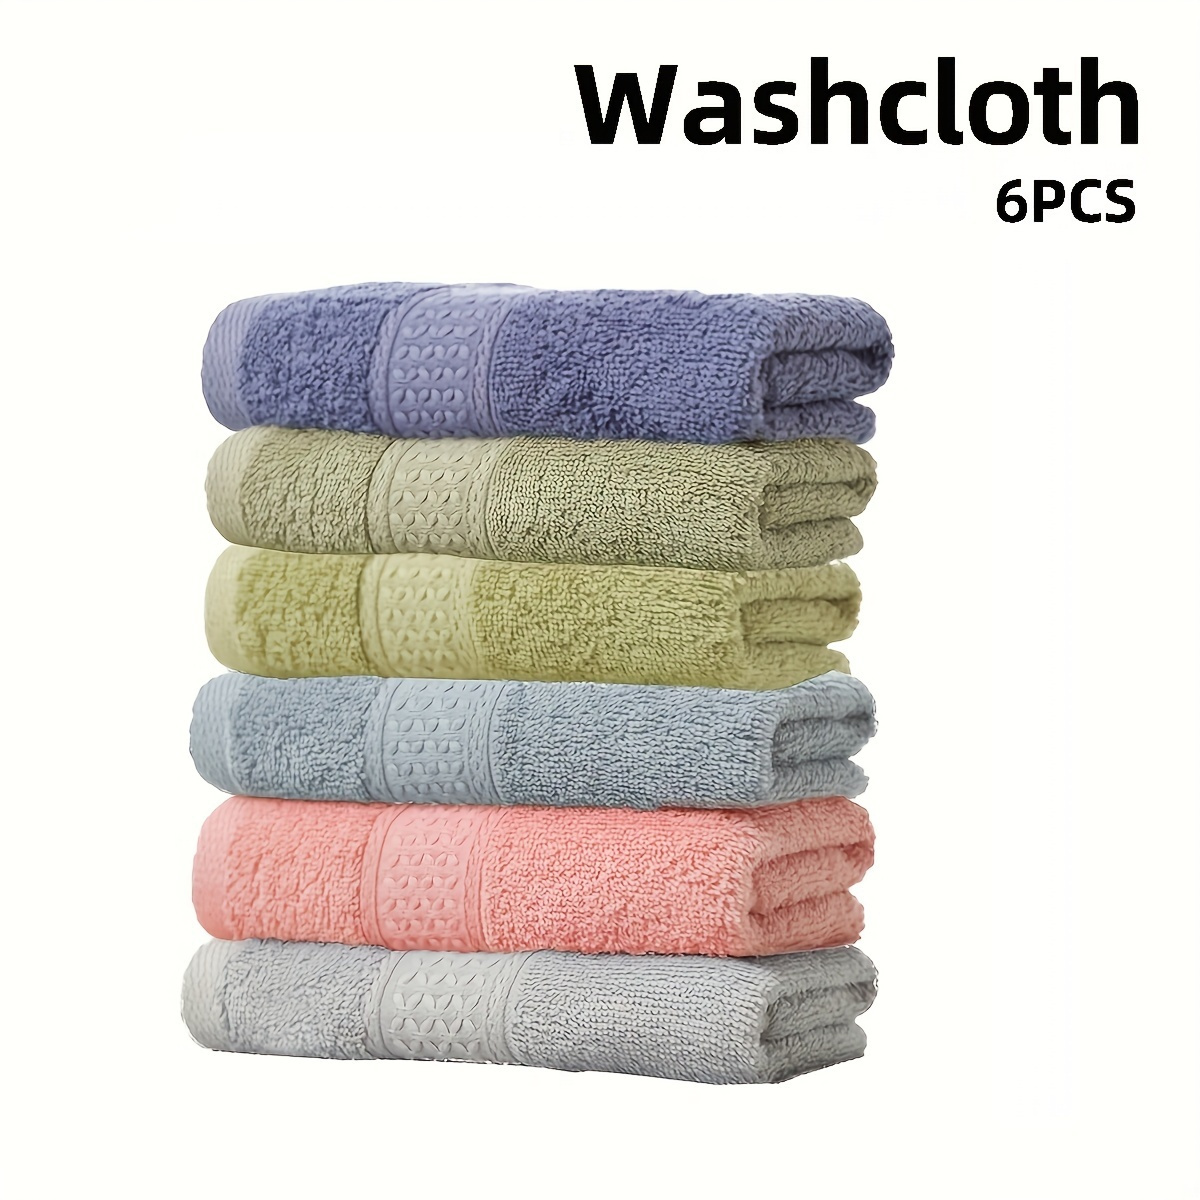 

6pcs Cotton Wash Cloths Face Cloths With 6 Colors, Bathroom Washcloth Set Highly Absorbent Face Cloths, 13*13in, Bathroom Accessory